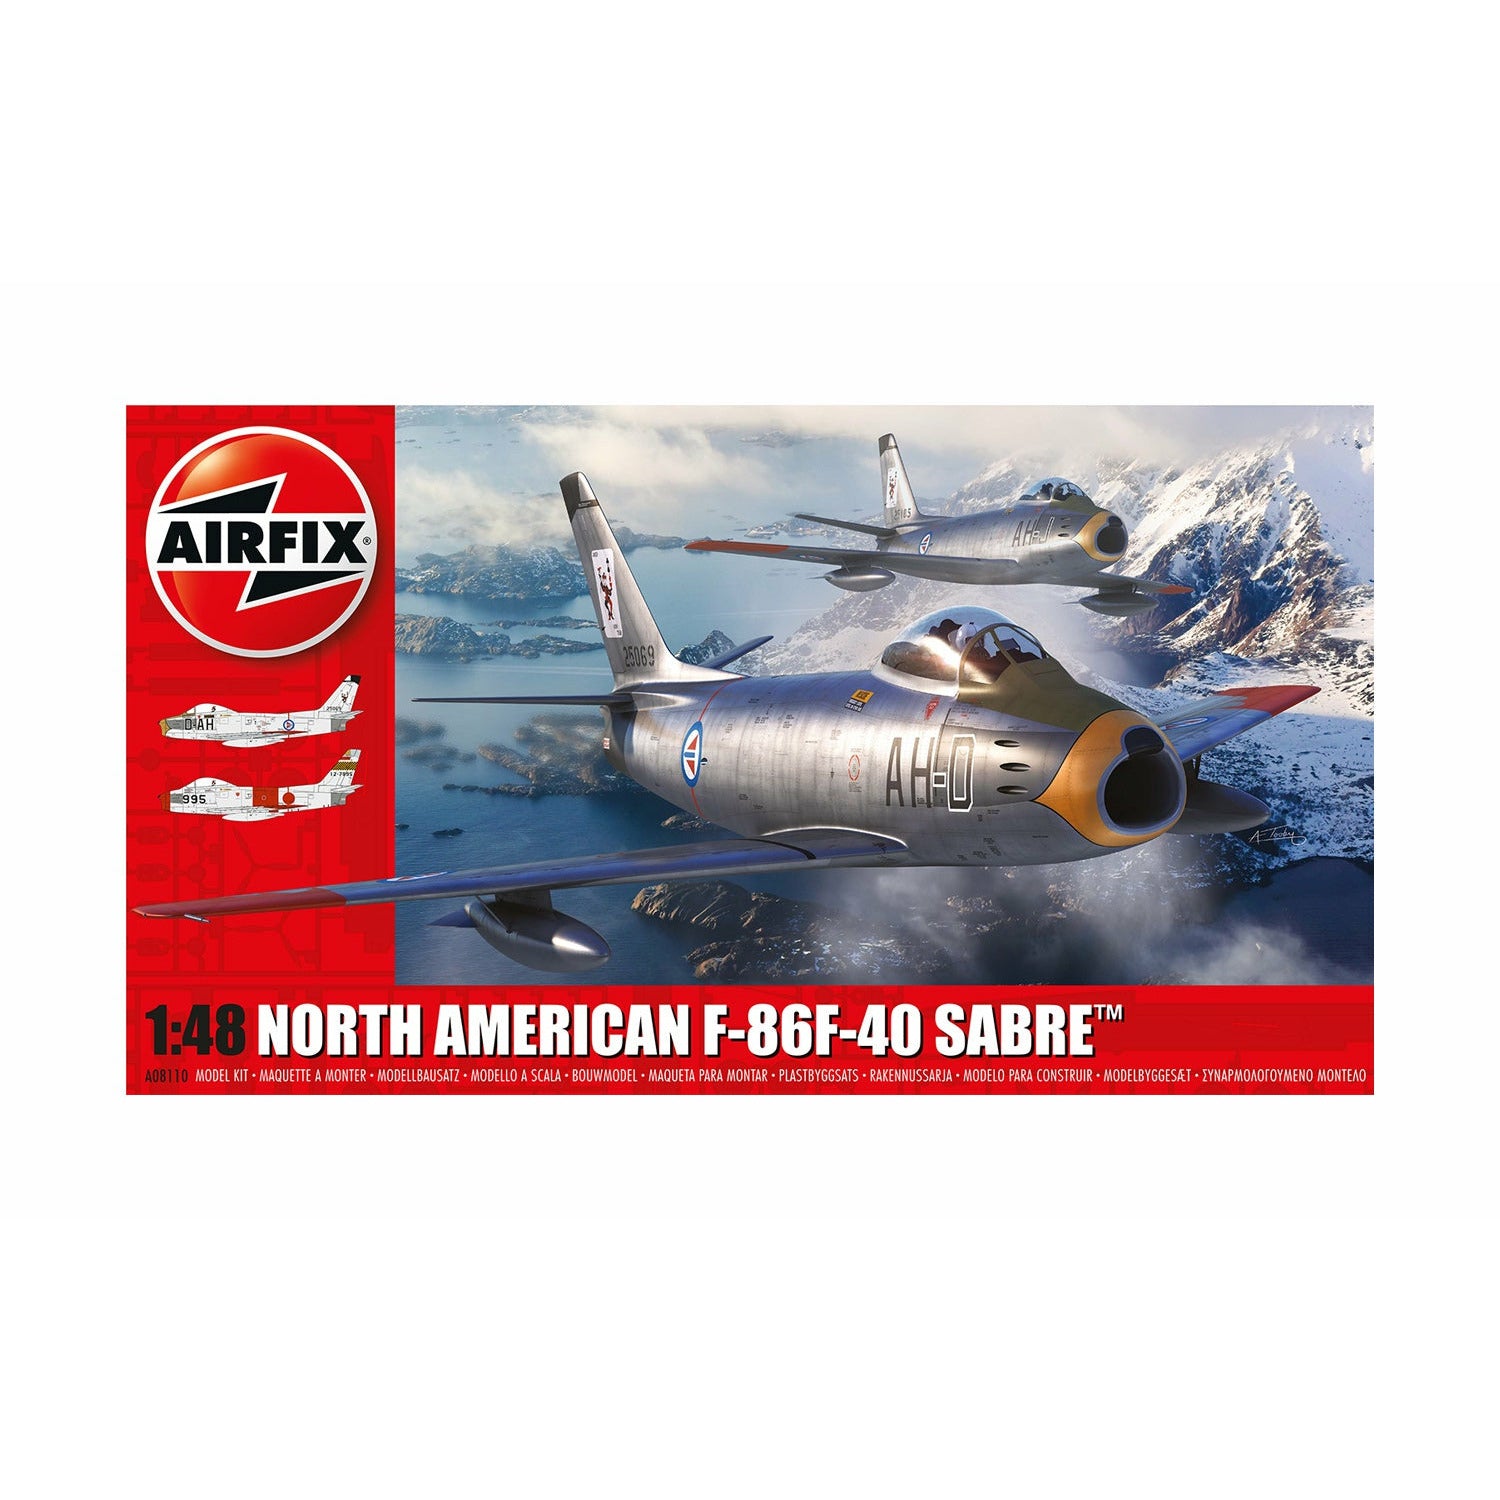 North American F-86f-40 Sabre 1/48 #08110 by Airfix